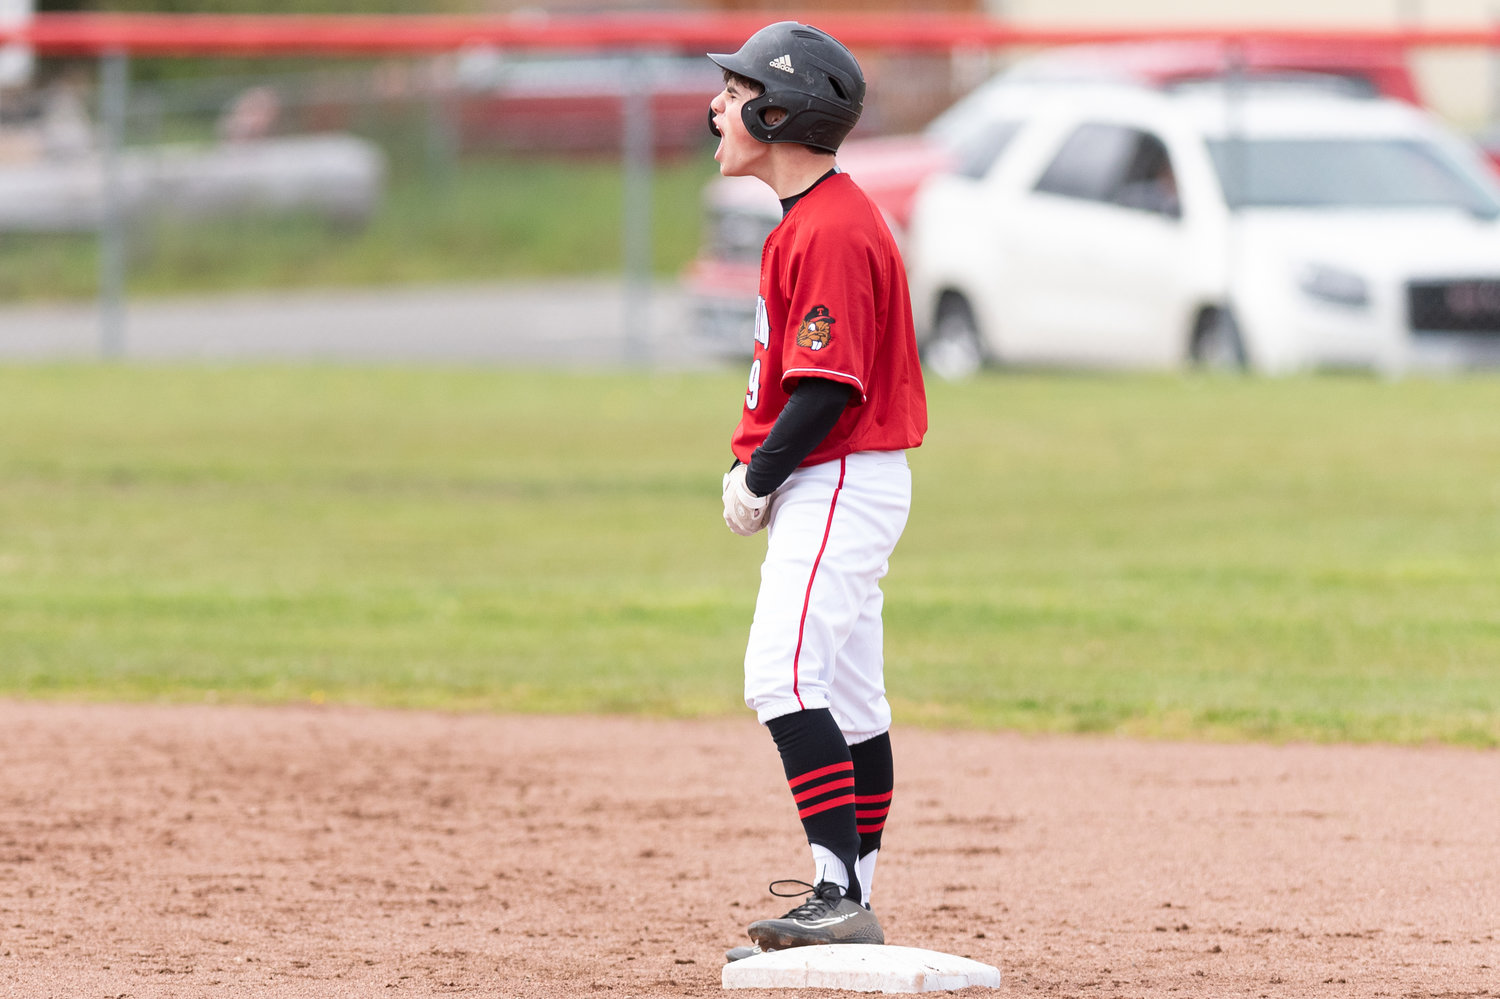 Tenino's Will Feltus yells in celebration toward his dugout after hitting a double against Montesano May 3.